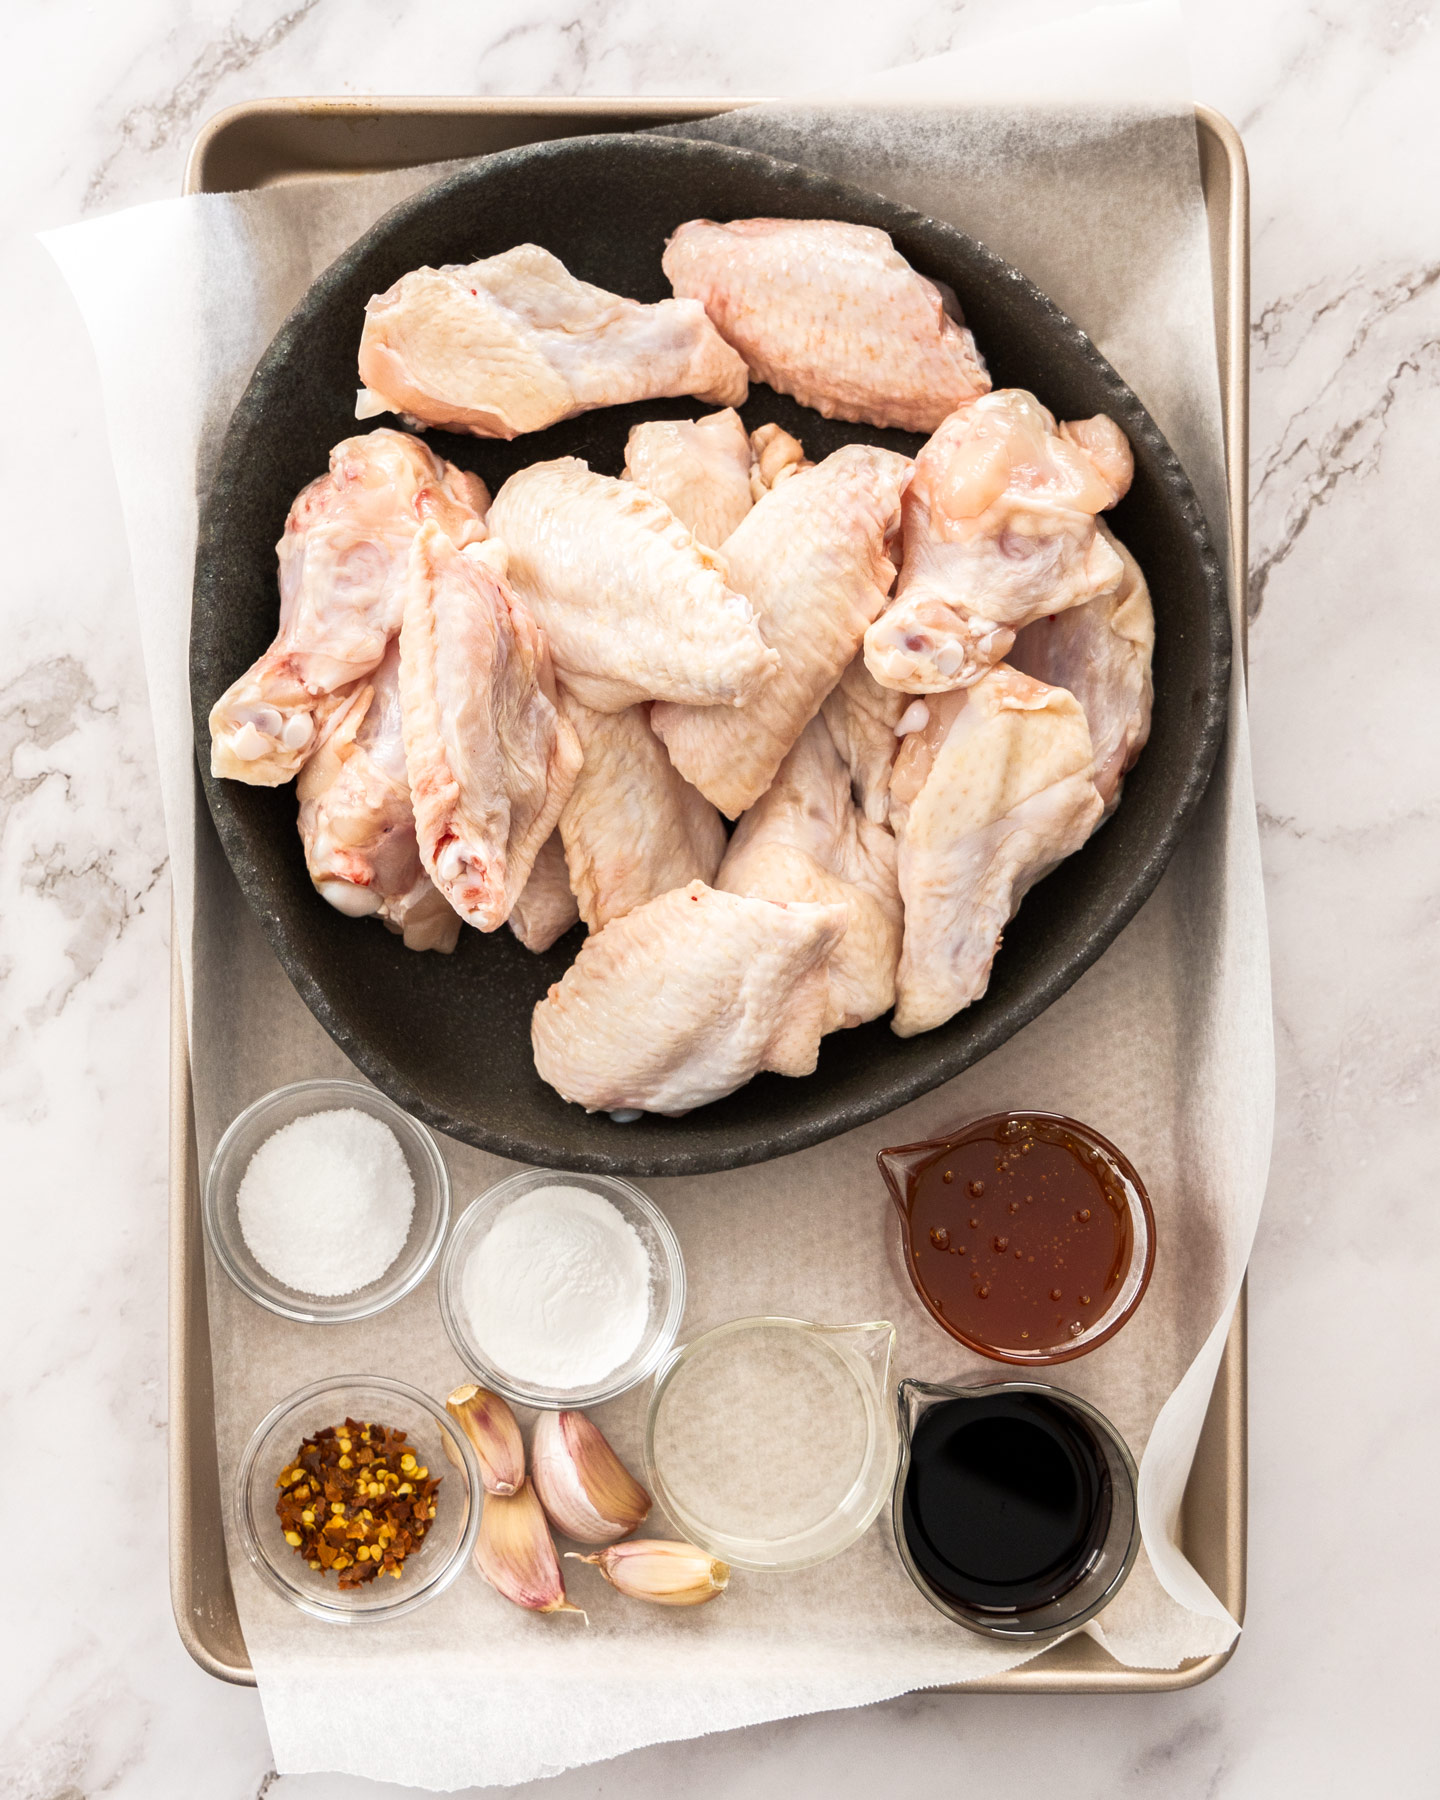 Ingredients for honey garlic chicken wings on a baking tray.